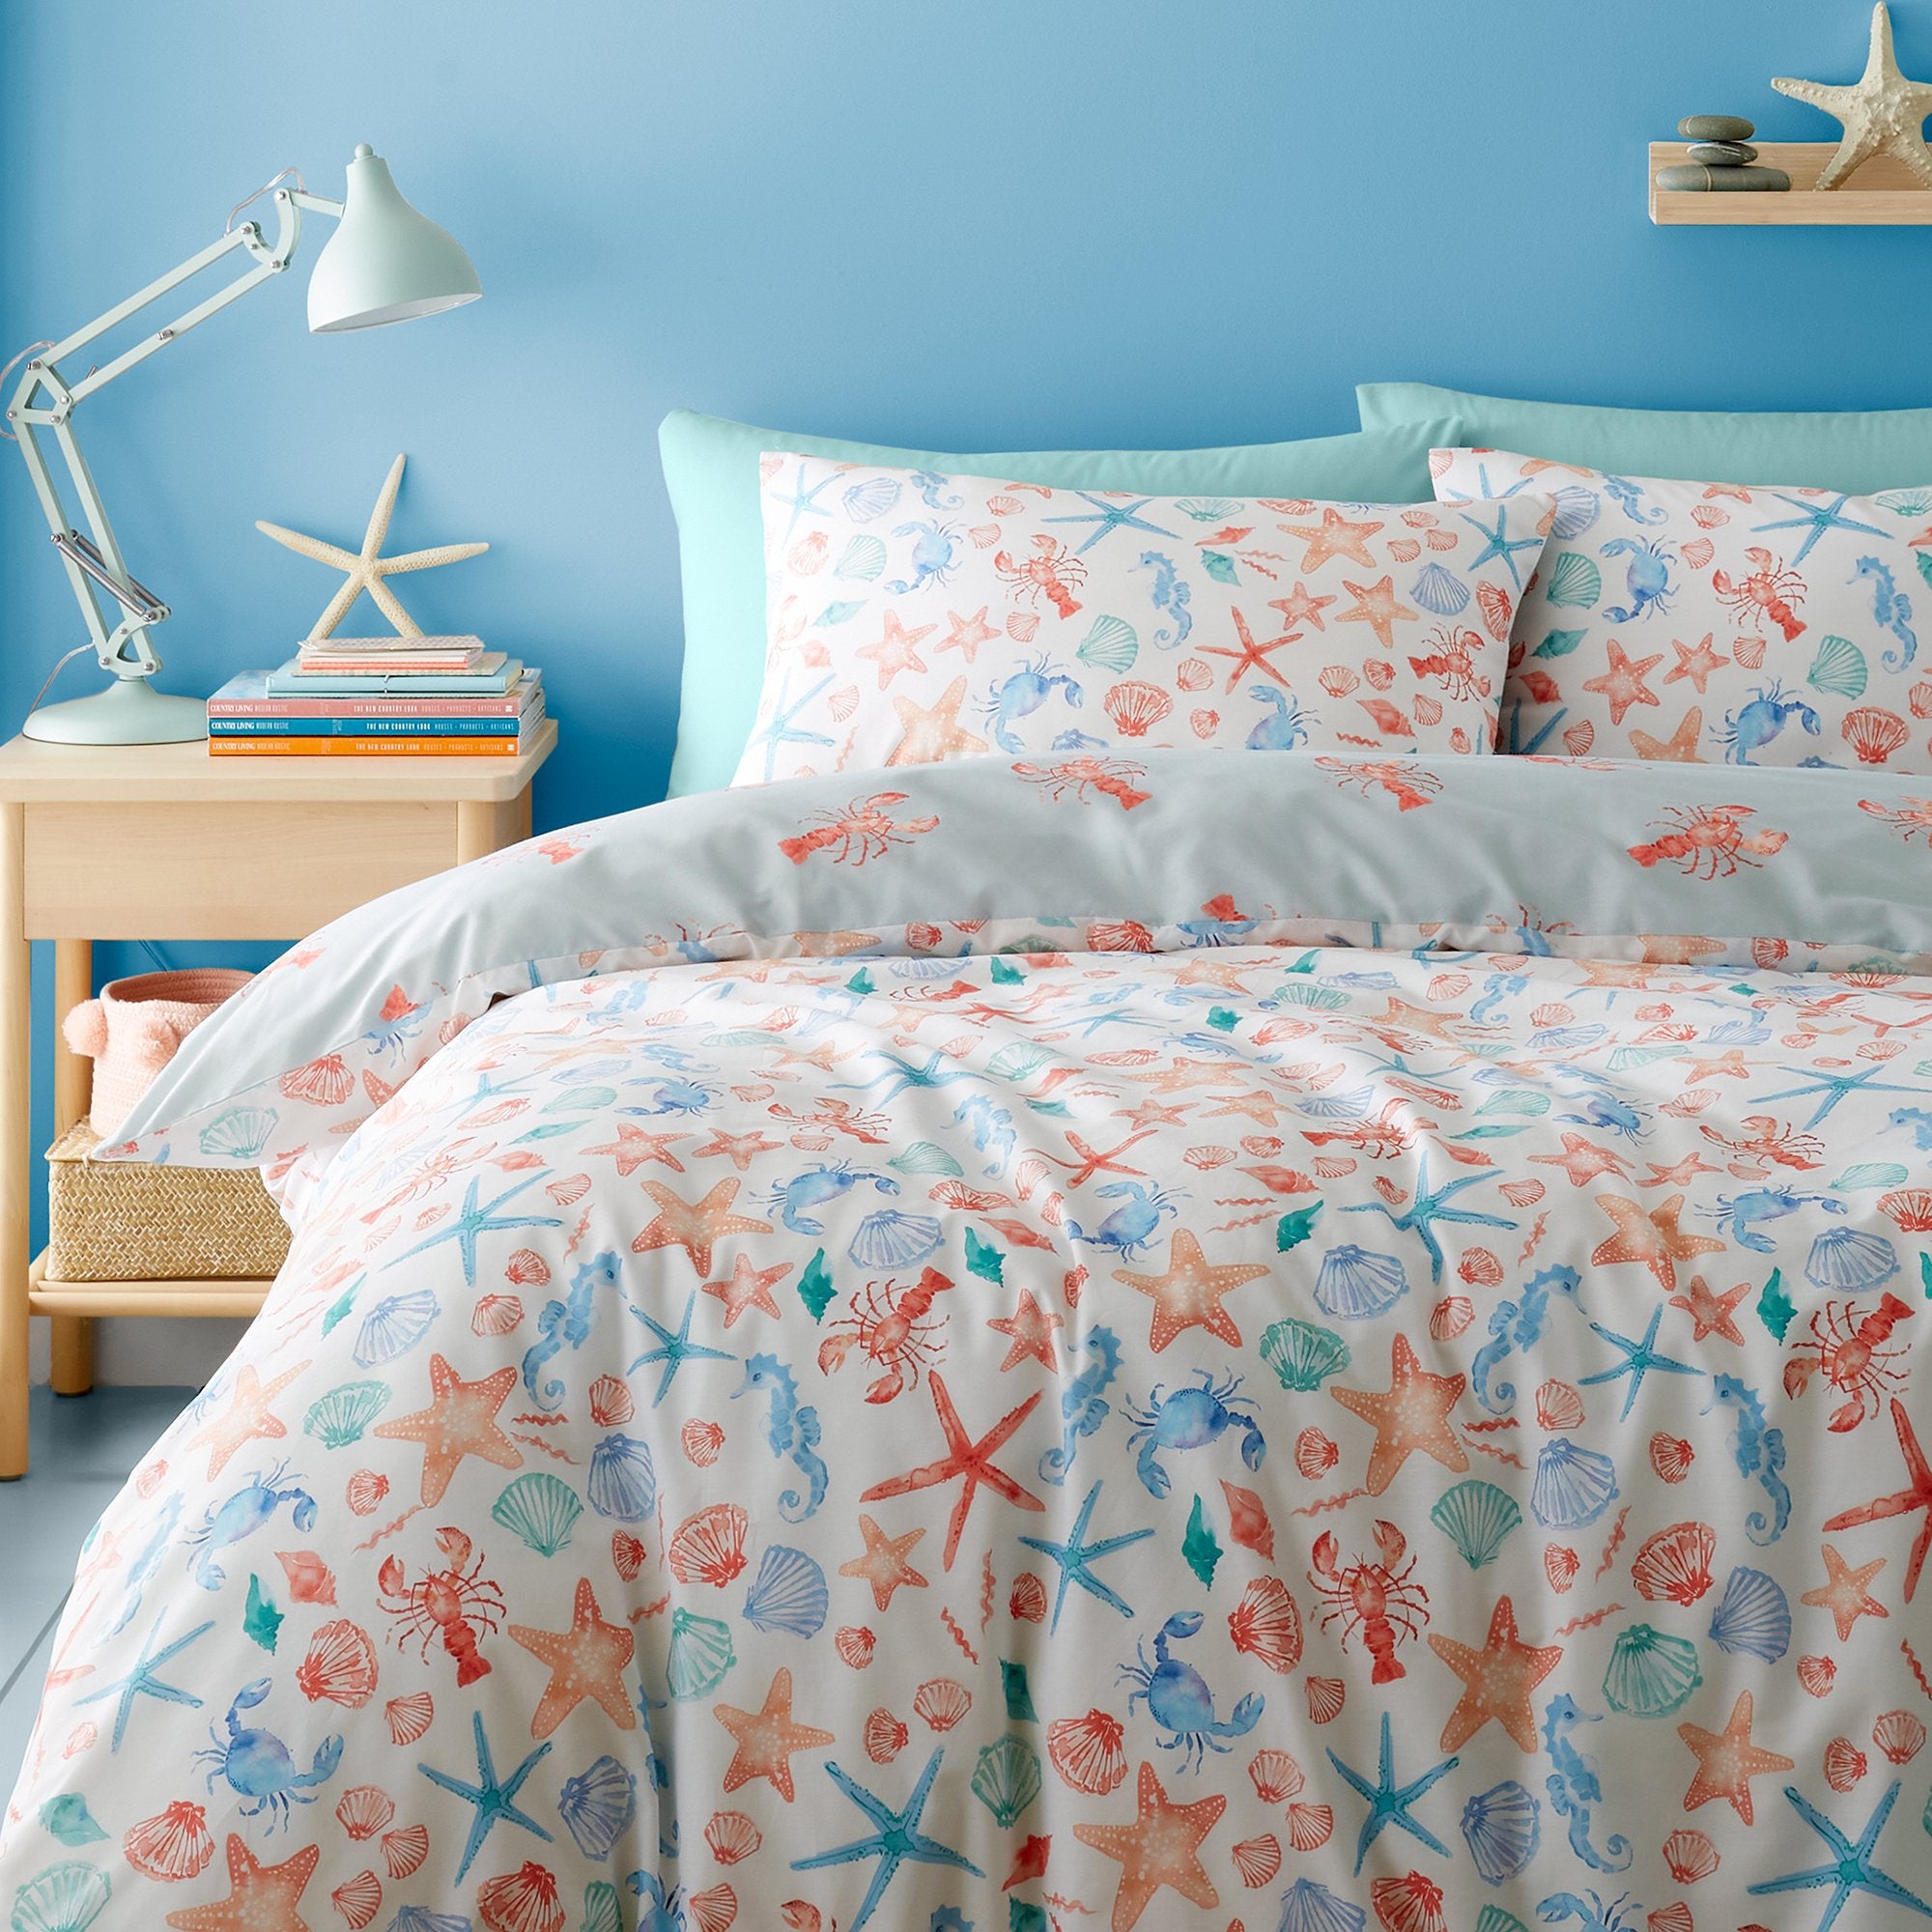 Duvet Cover Set Coastal Bay by Fusion in Coral/Camel